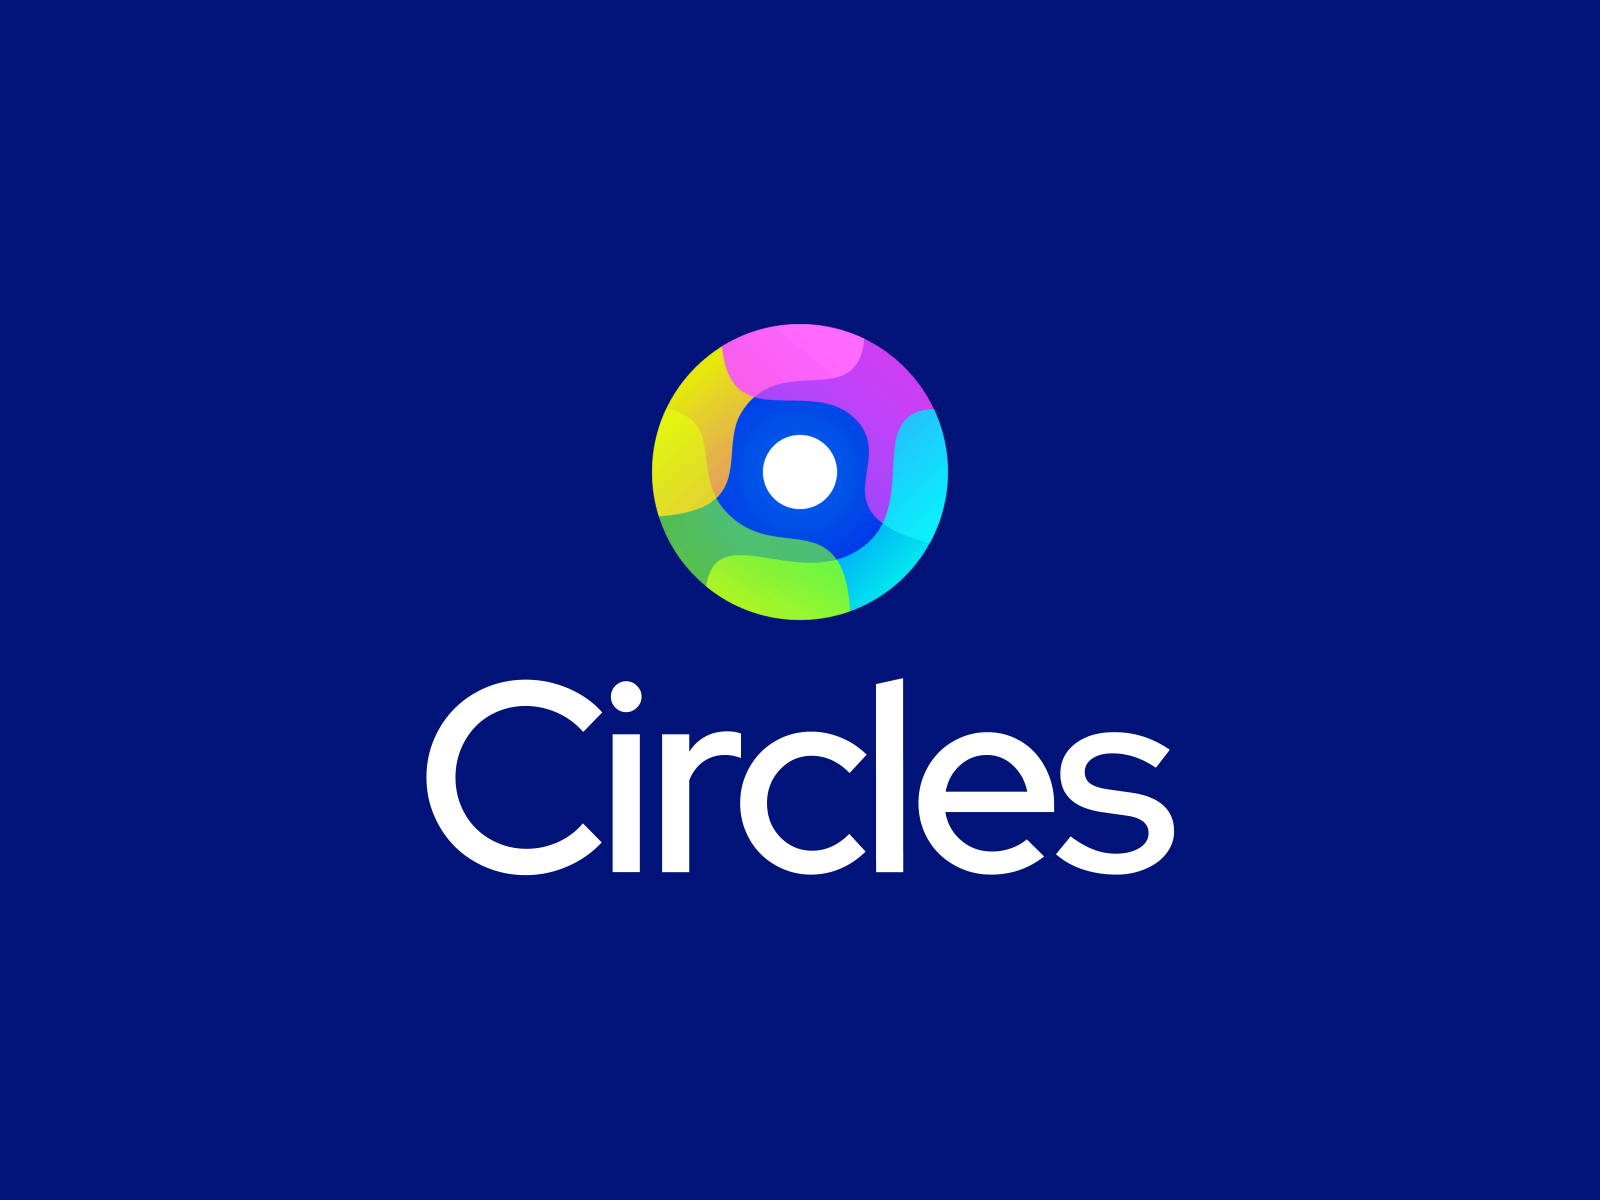 Circles App Logo Animation after effects motion graphics animation video gif loop app ios android navigation brand identity branding circle circles round friendly curves path color colorful group team community together logo mark symbol icon mix mixed gradient colors overlap intersect intimacy space personal center central element startup social media marketing tech technology cyber computer